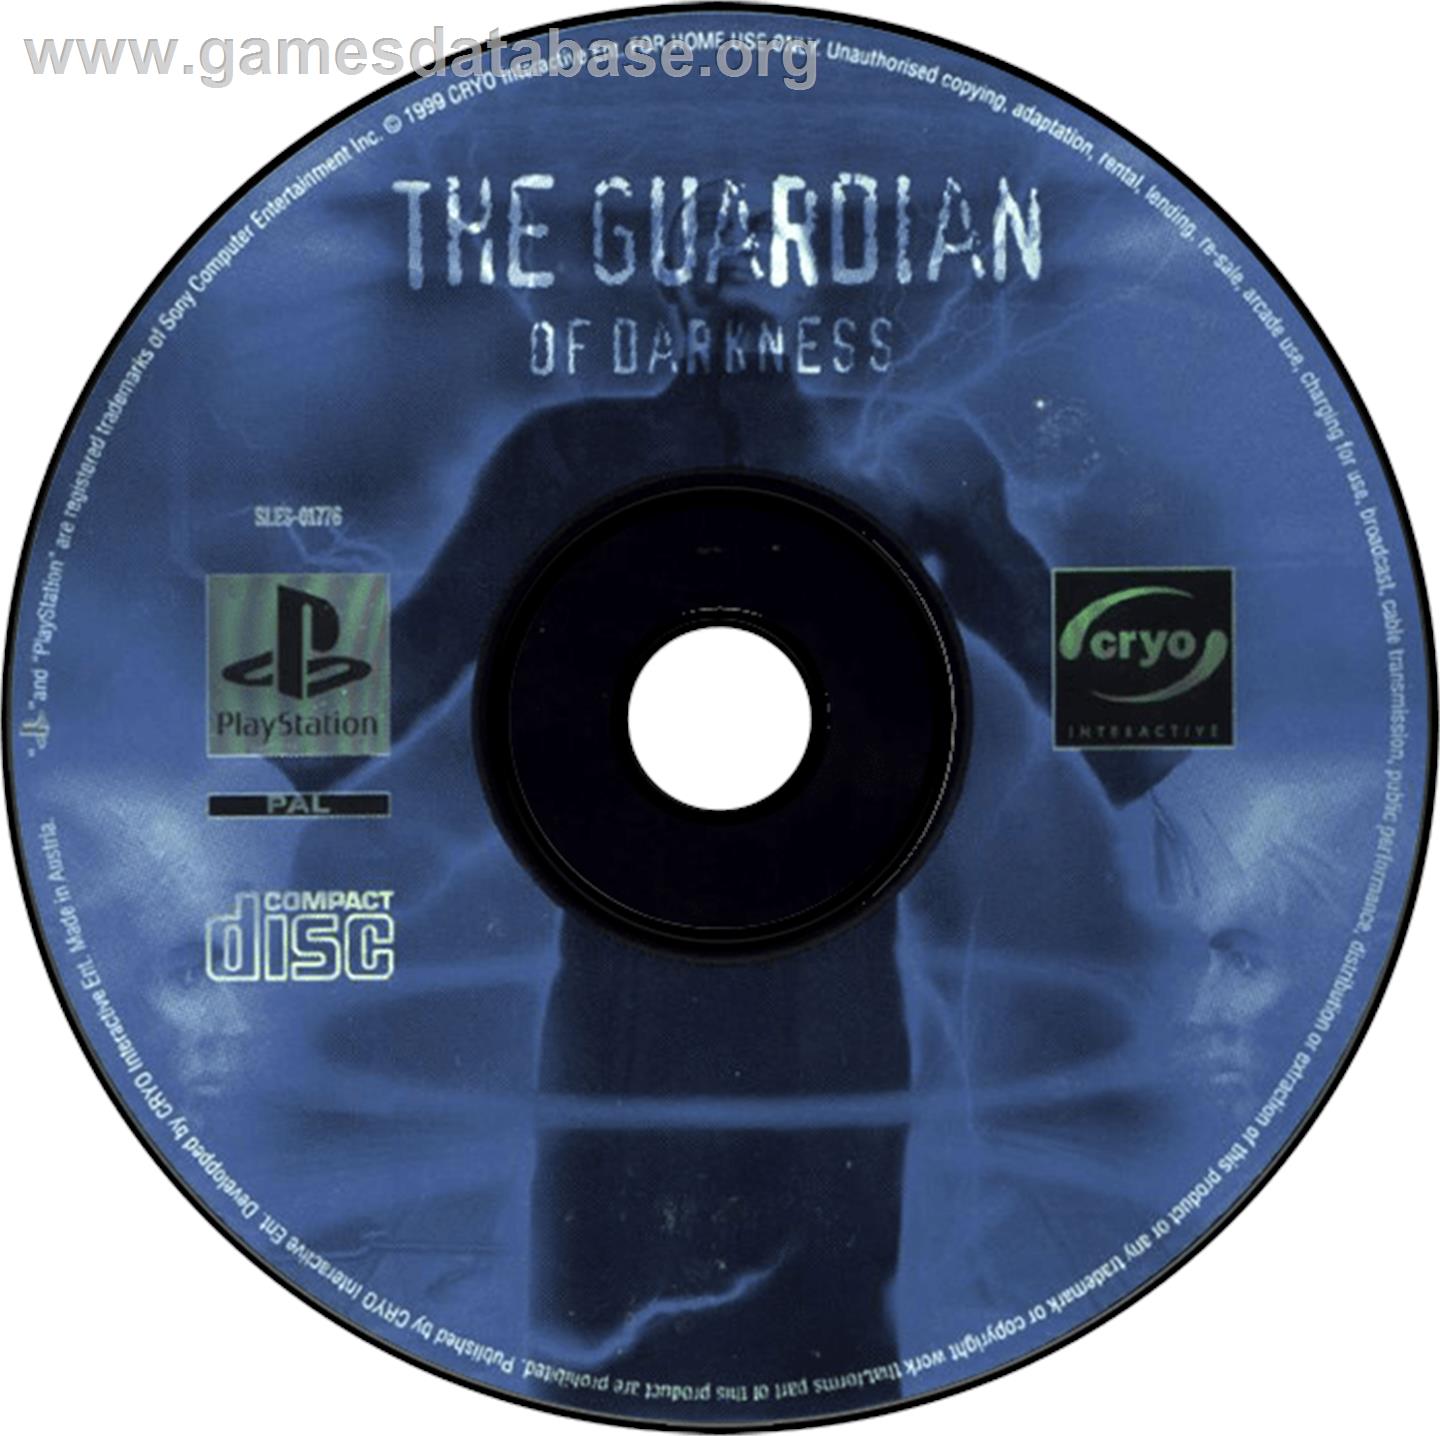 The Guardian of Darkness - Sony Playstation - Artwork - Disc